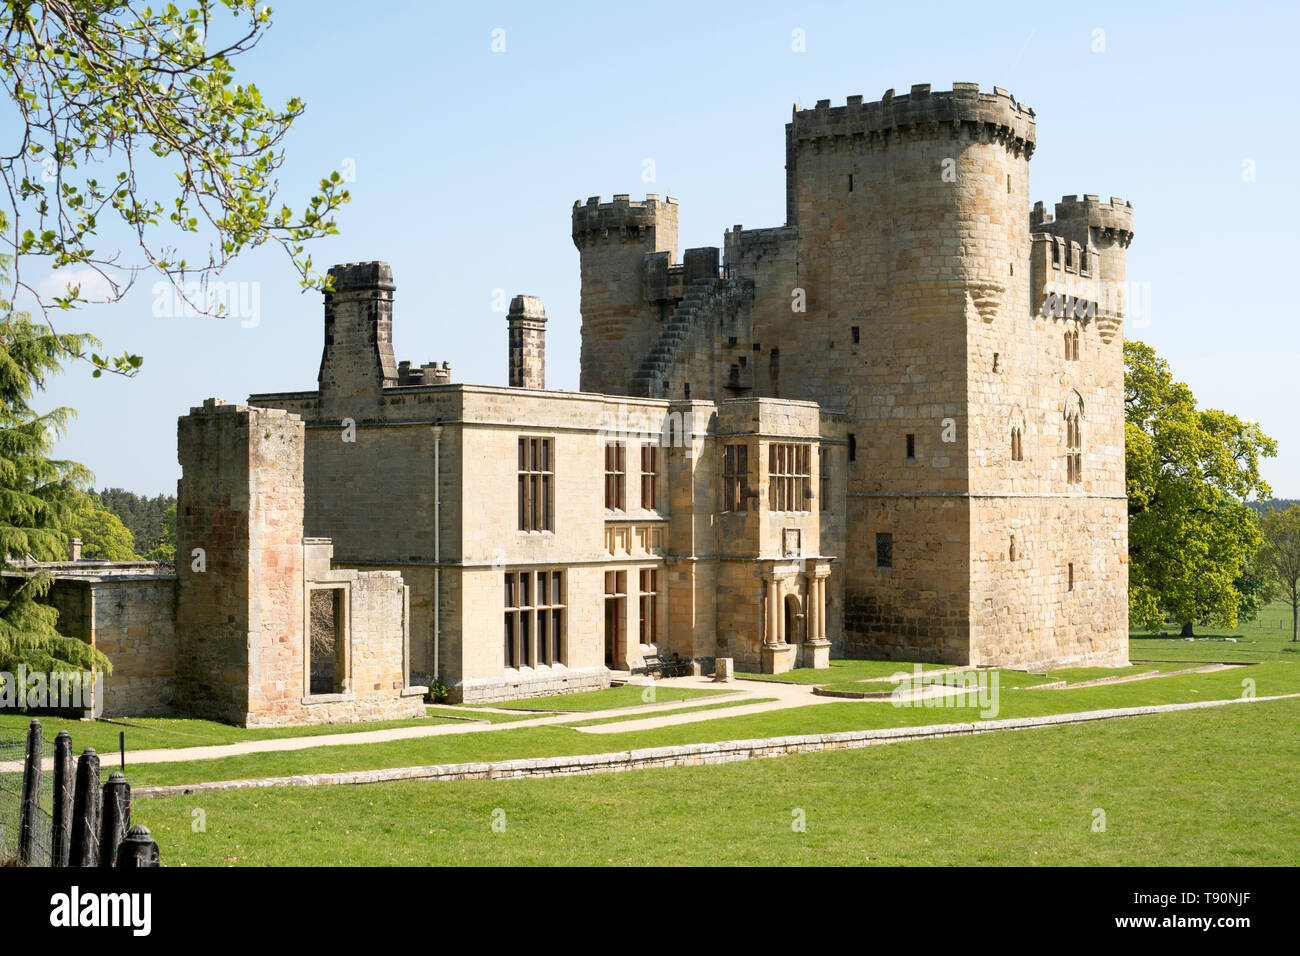 Belsay 14th century Tower House or castle with attached 17th century old hall, Northumberland, England, UK Stock Photo